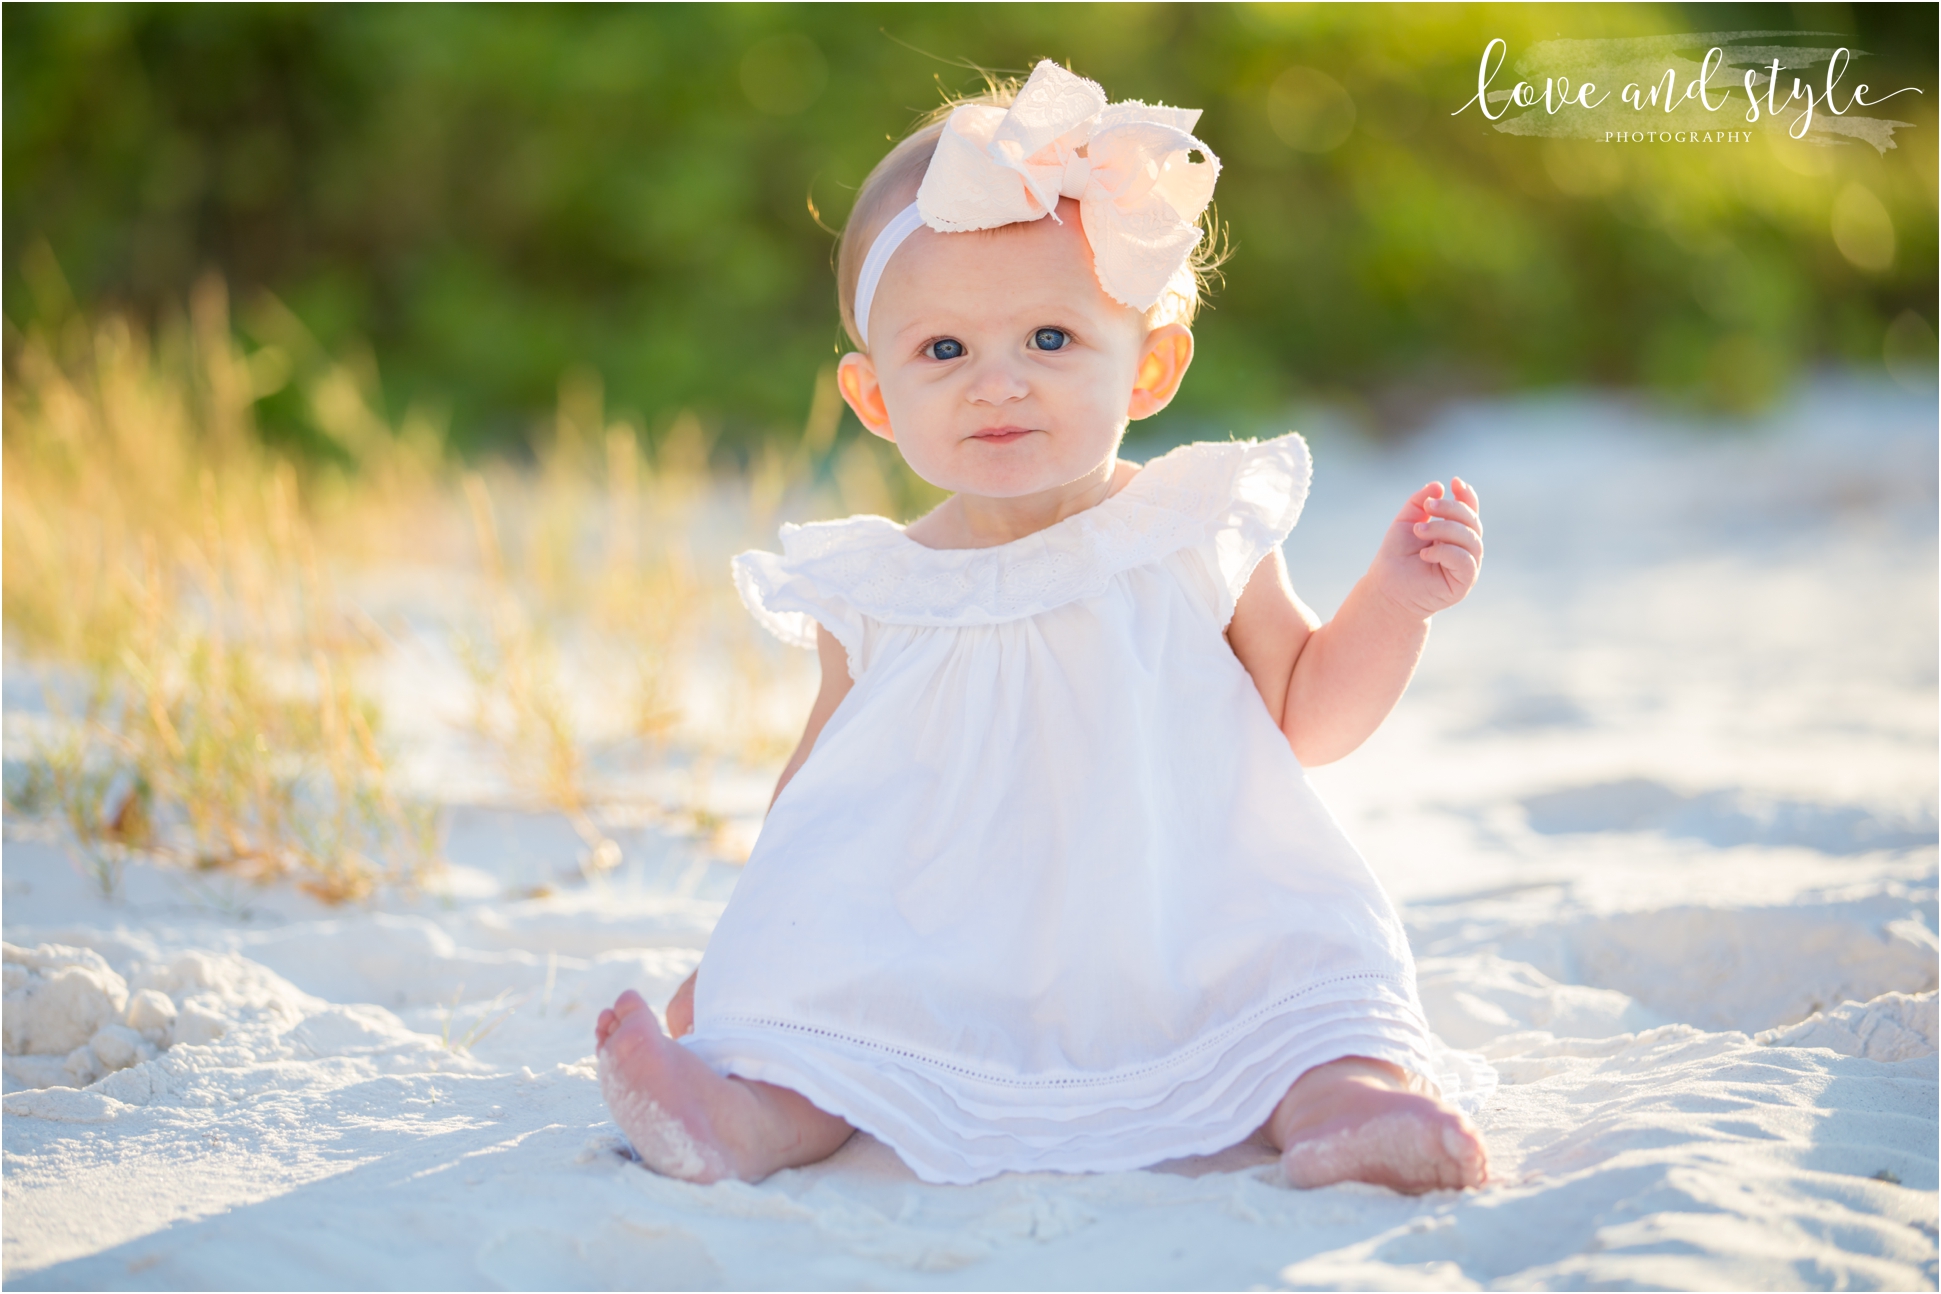 Baby on the beach wearing a white dress with a big white bow